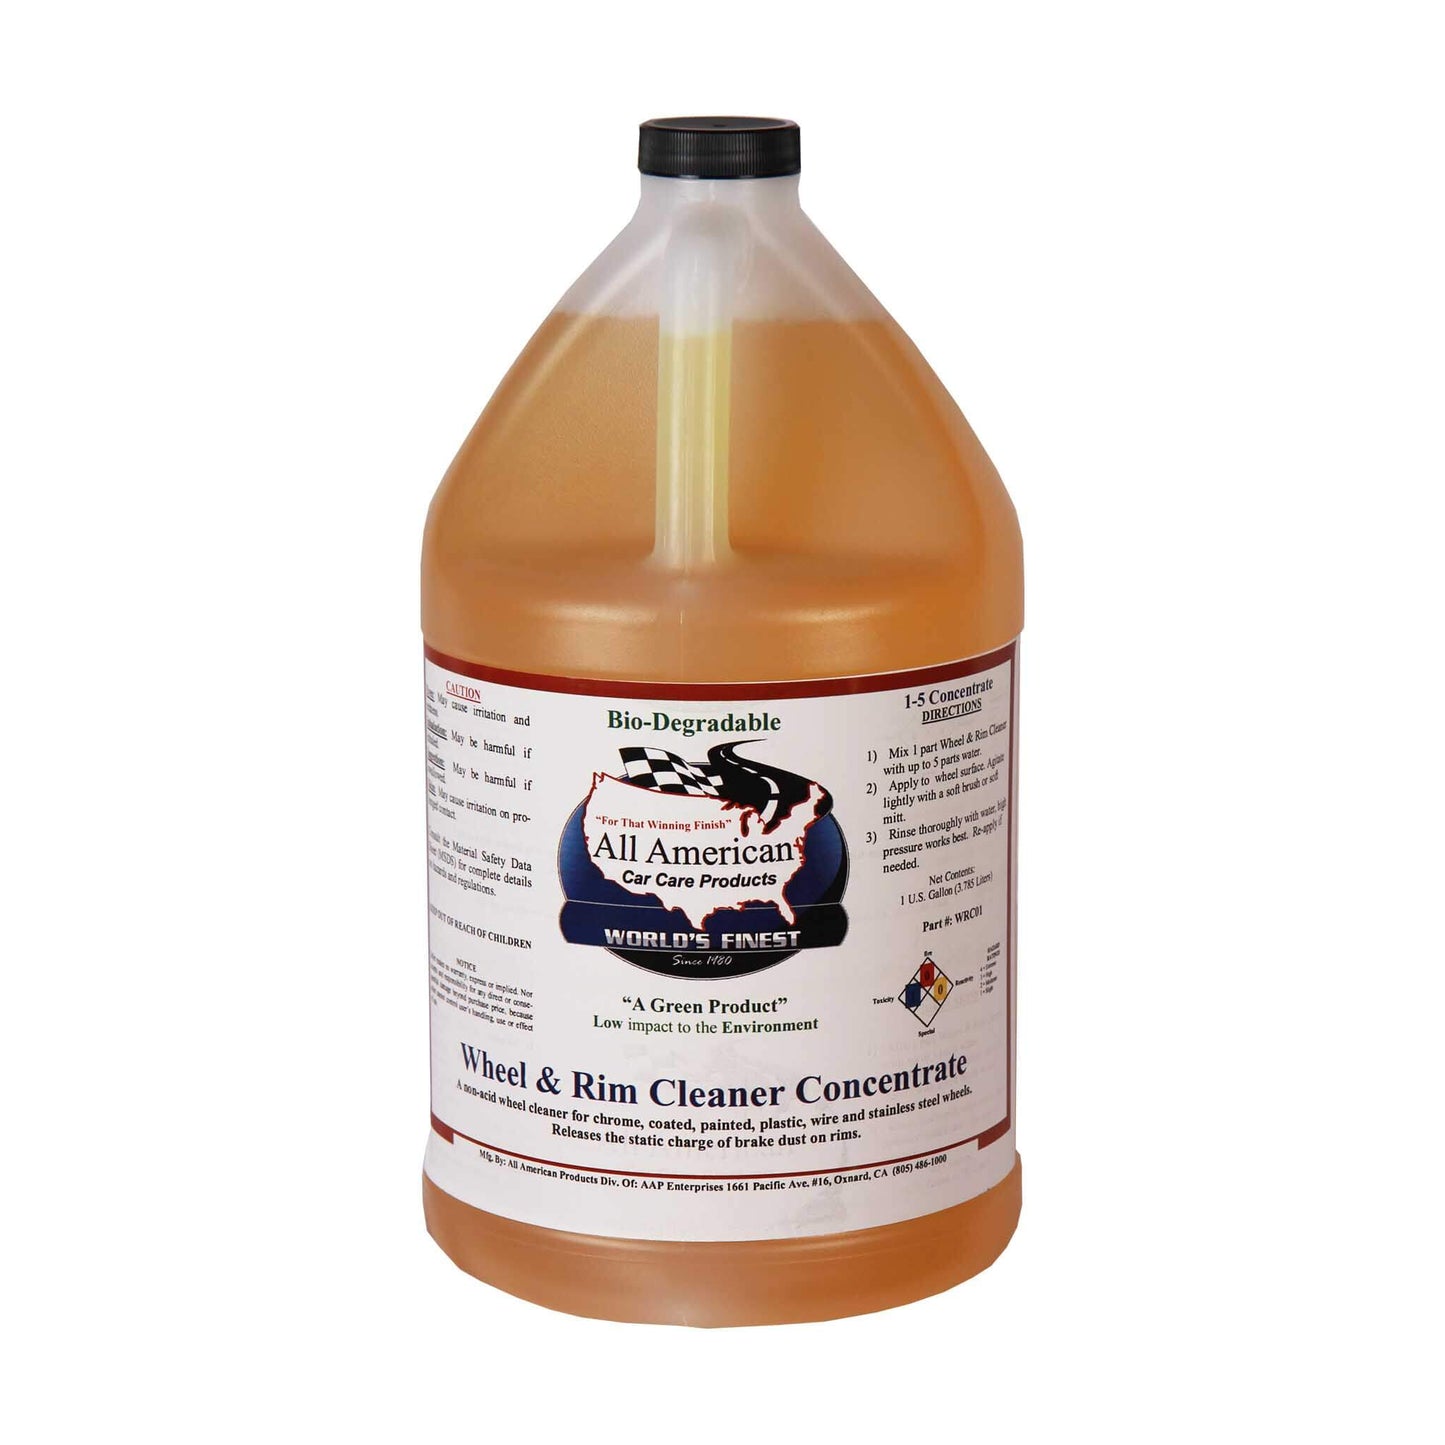 Wheel & Rim Cleaner Concentrate (1 Gallon)